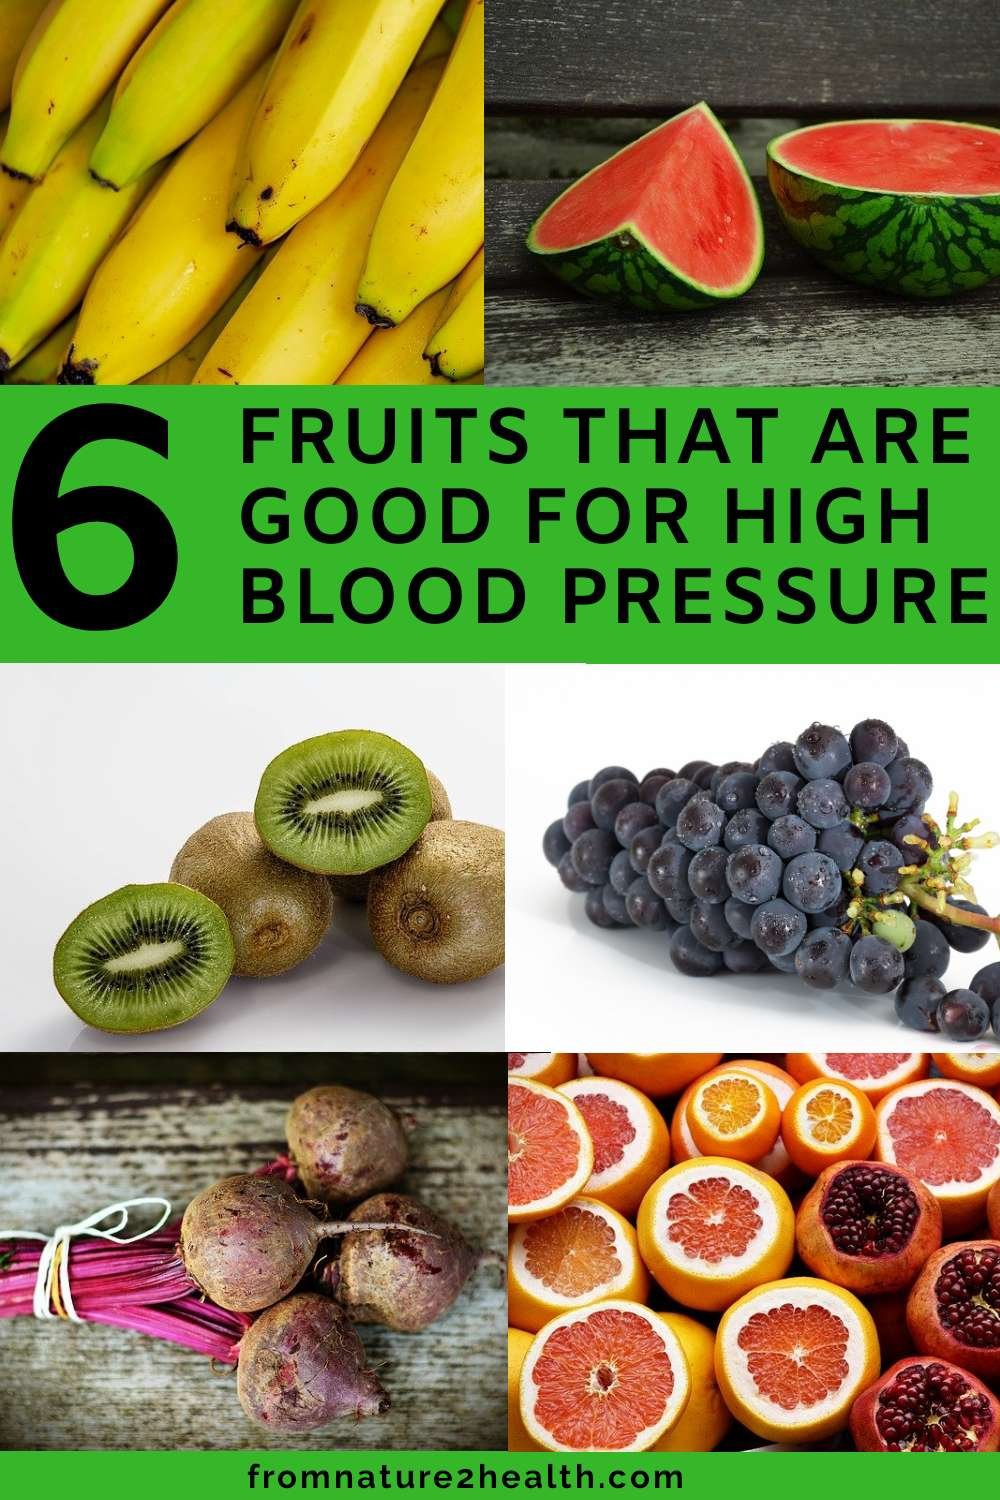 6 Fruits That Are Good for High Blood Pressure